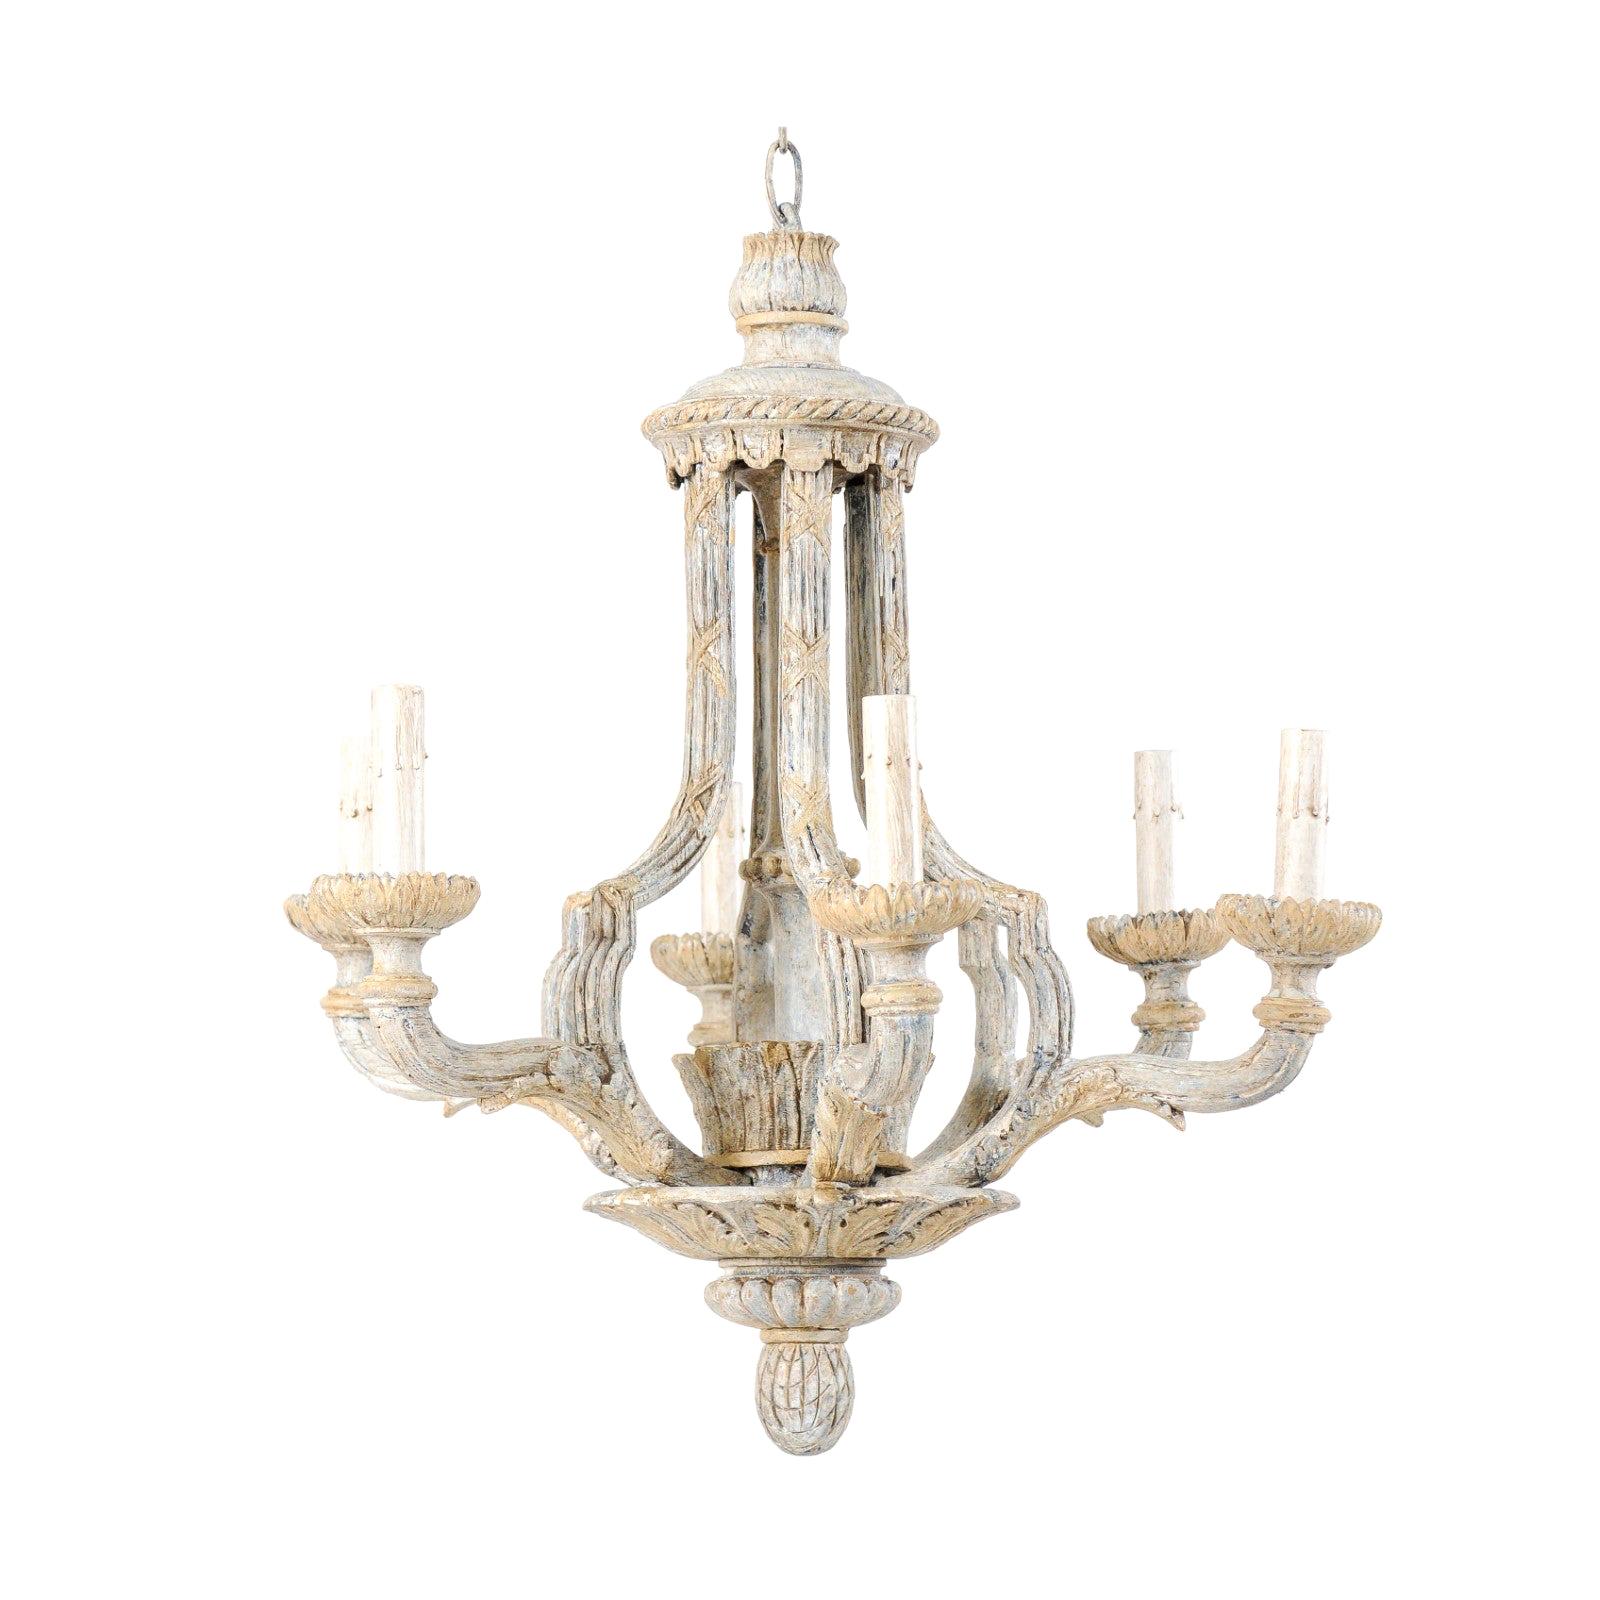 French Mid-20th Century Painted and Carved Wood Six-Light Chandelier